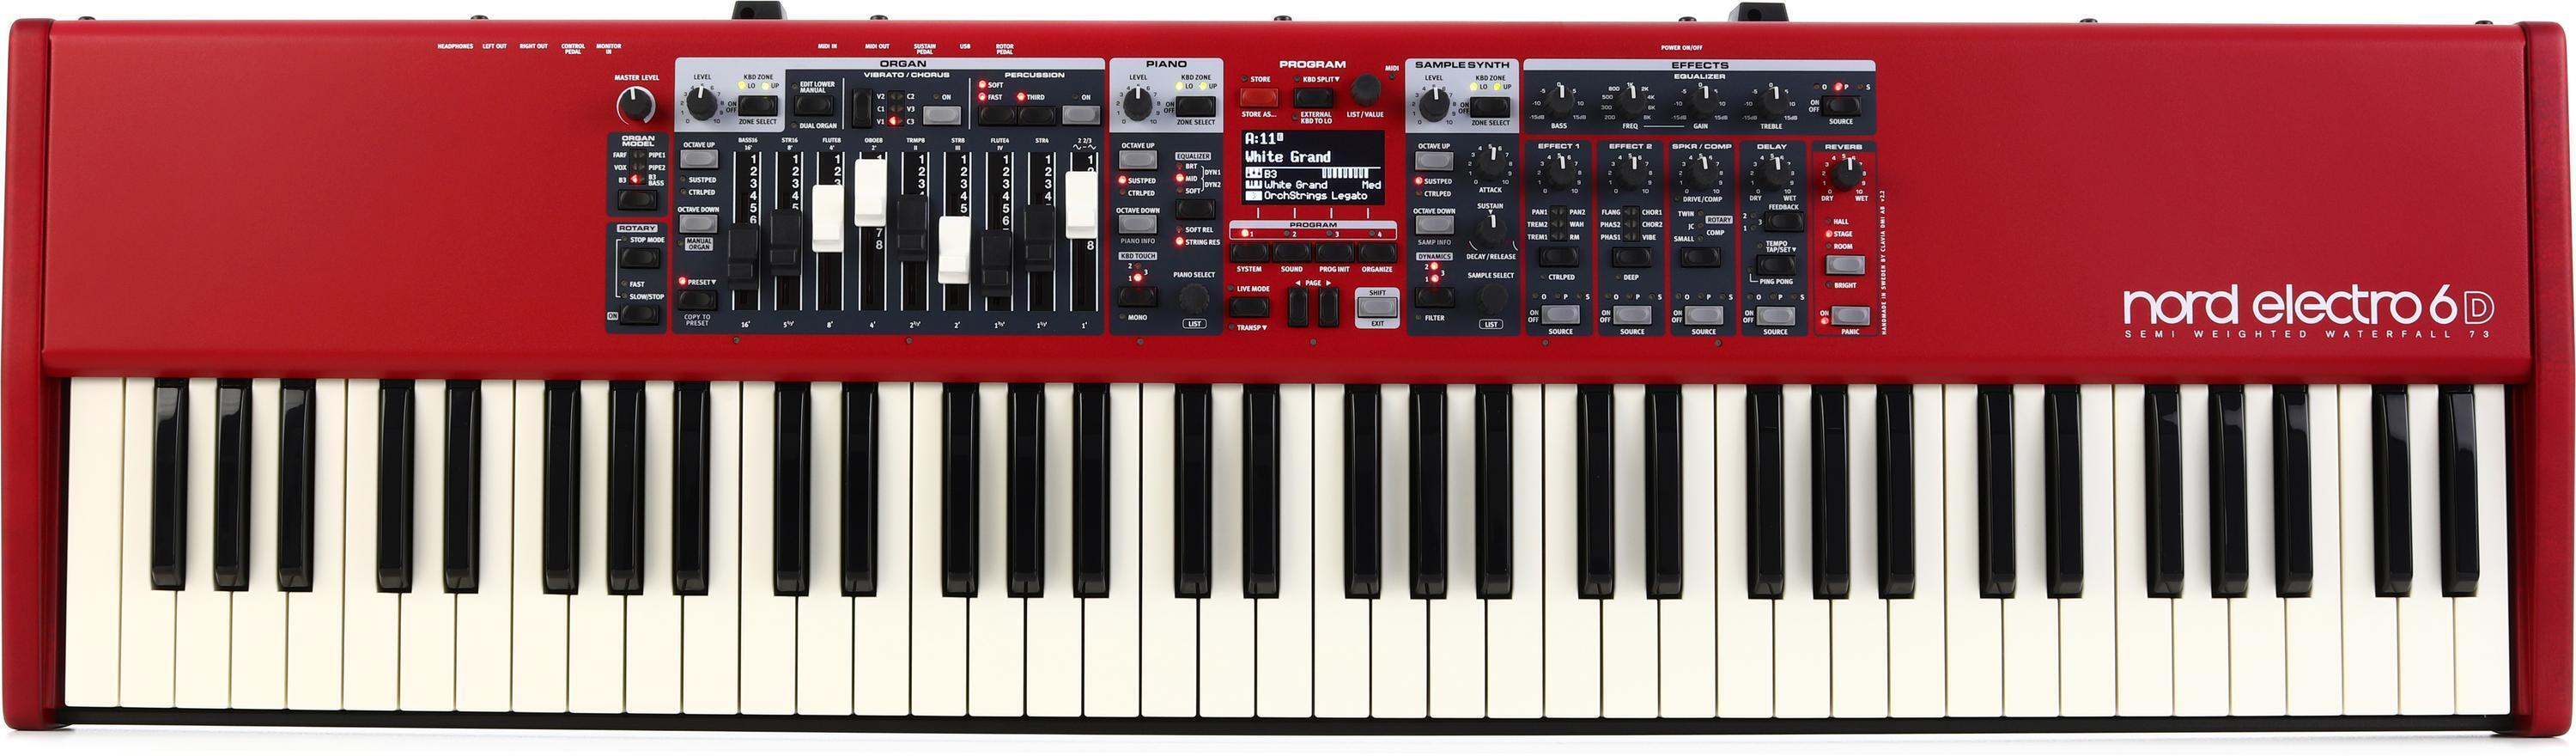 Nord Electro 6D 73 73-key Keyboard | Sweetwater